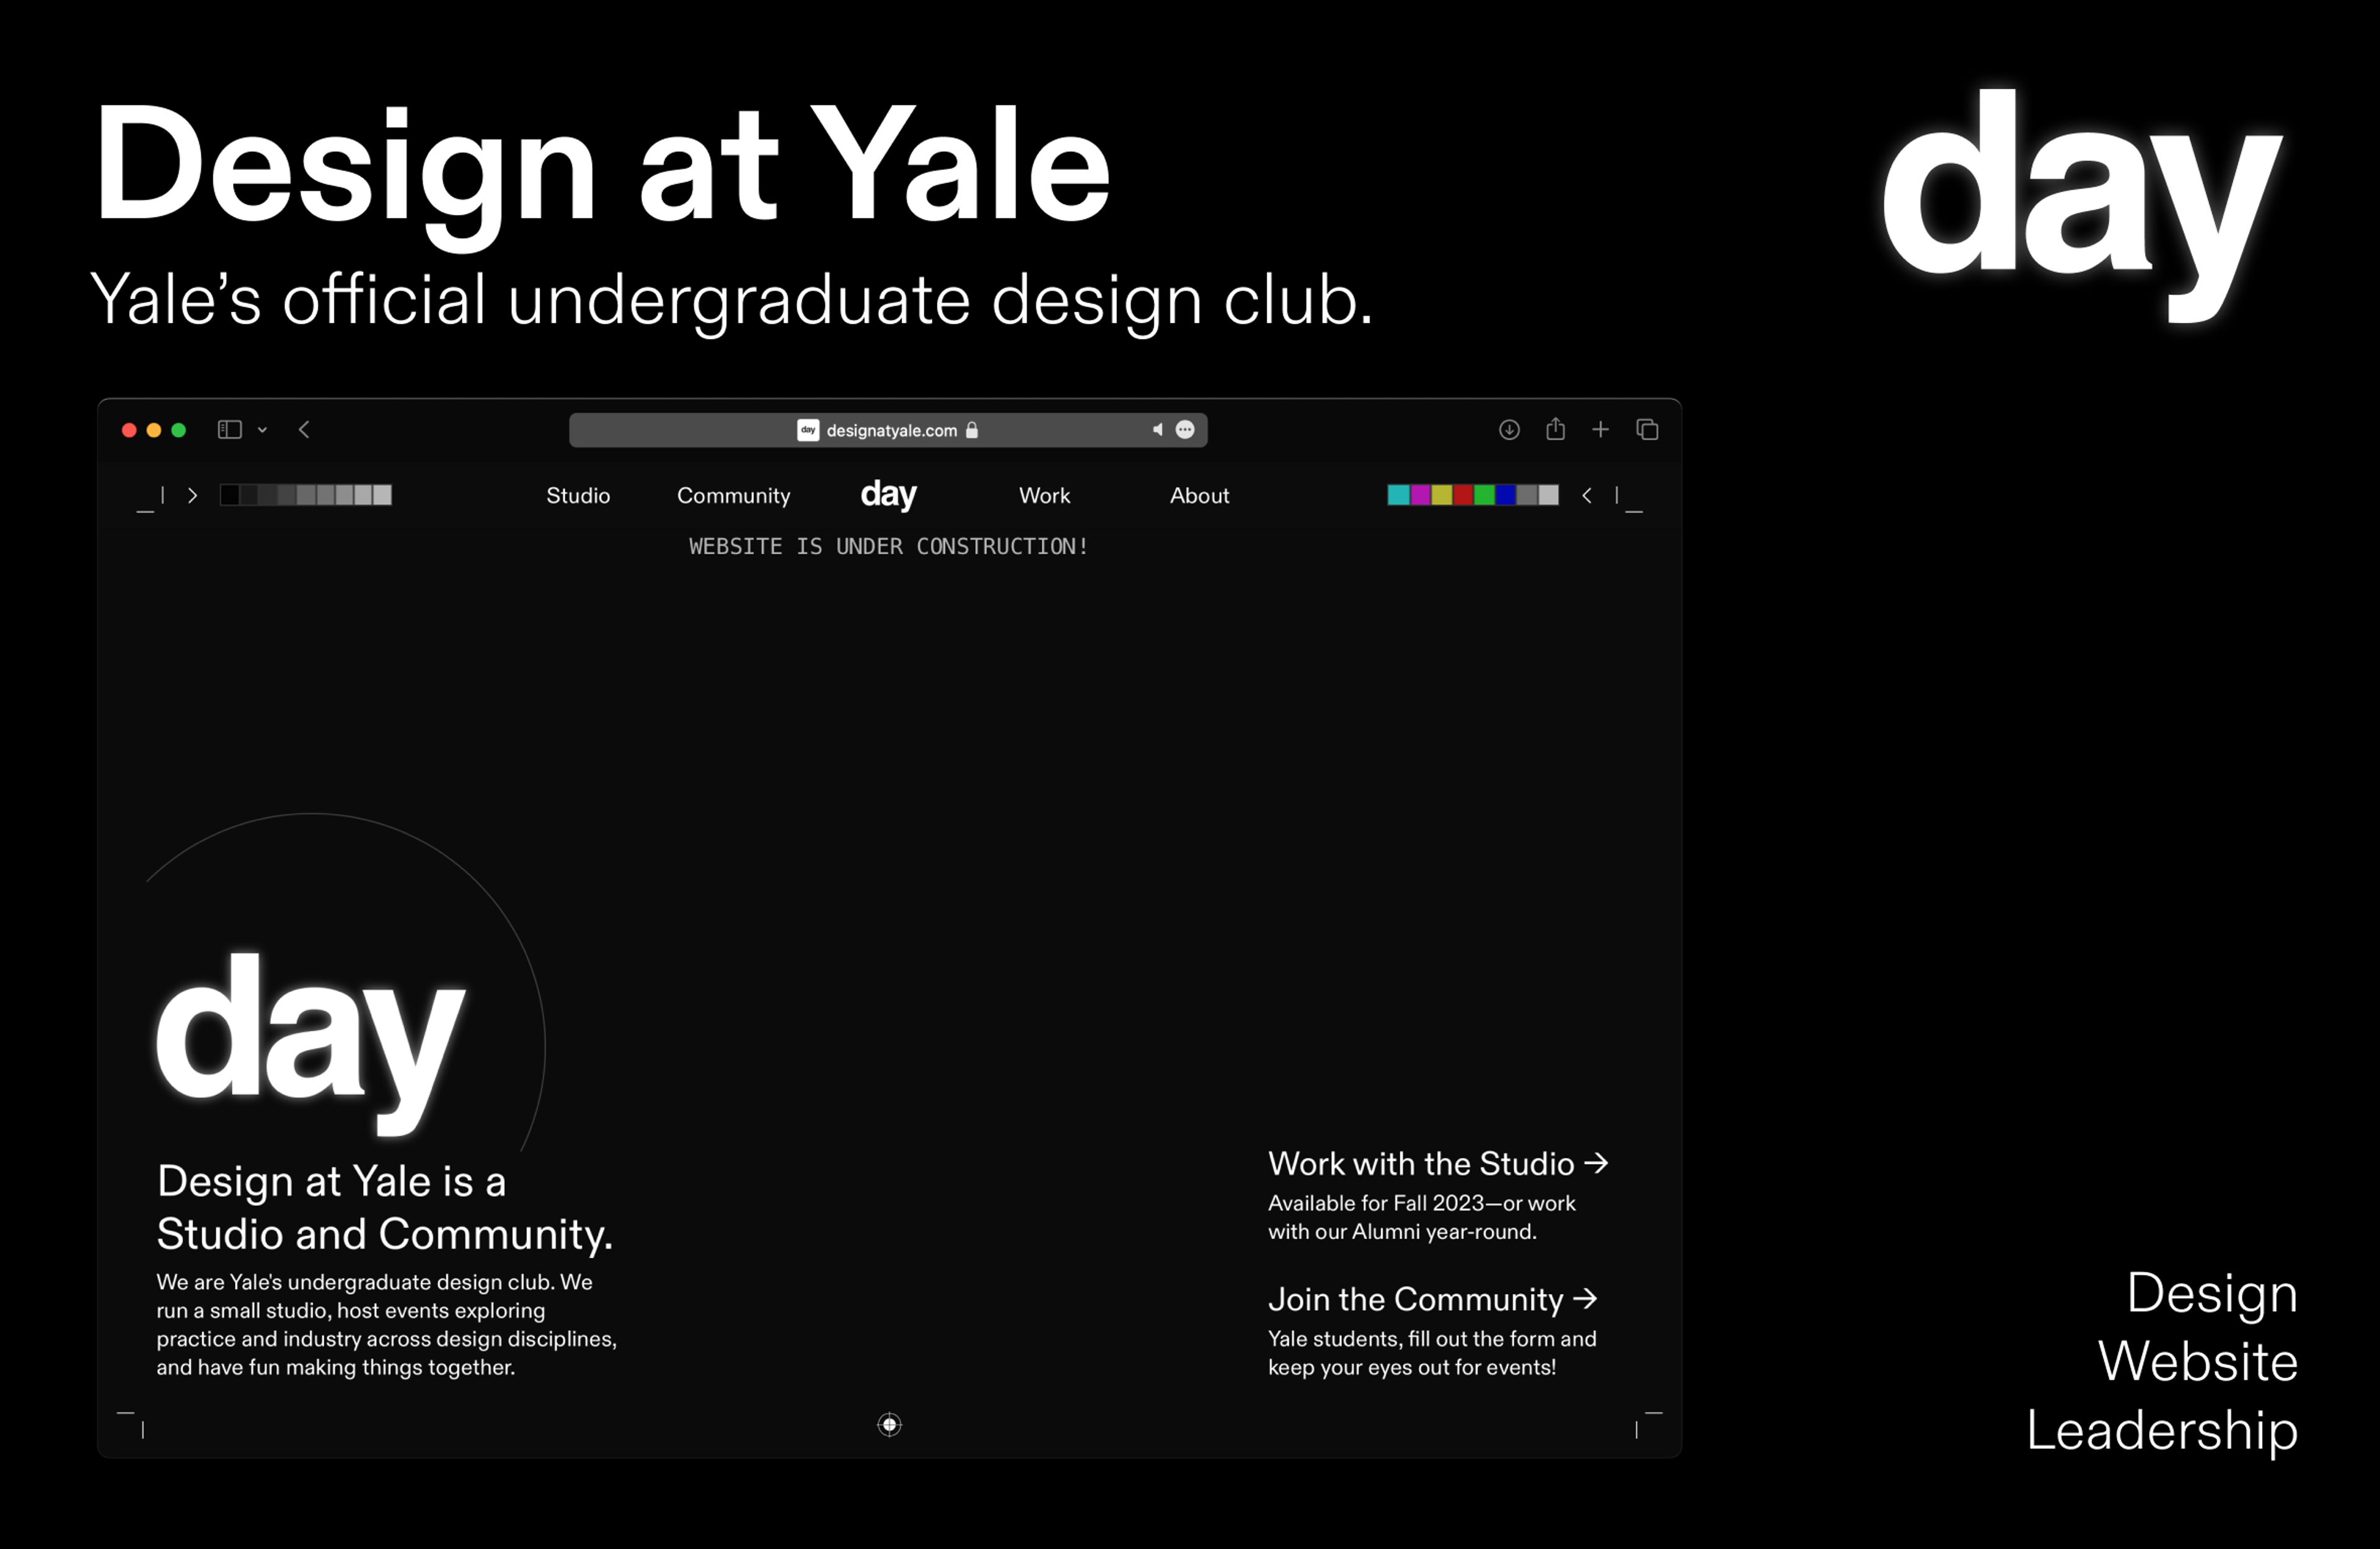 The Design at Yale website.